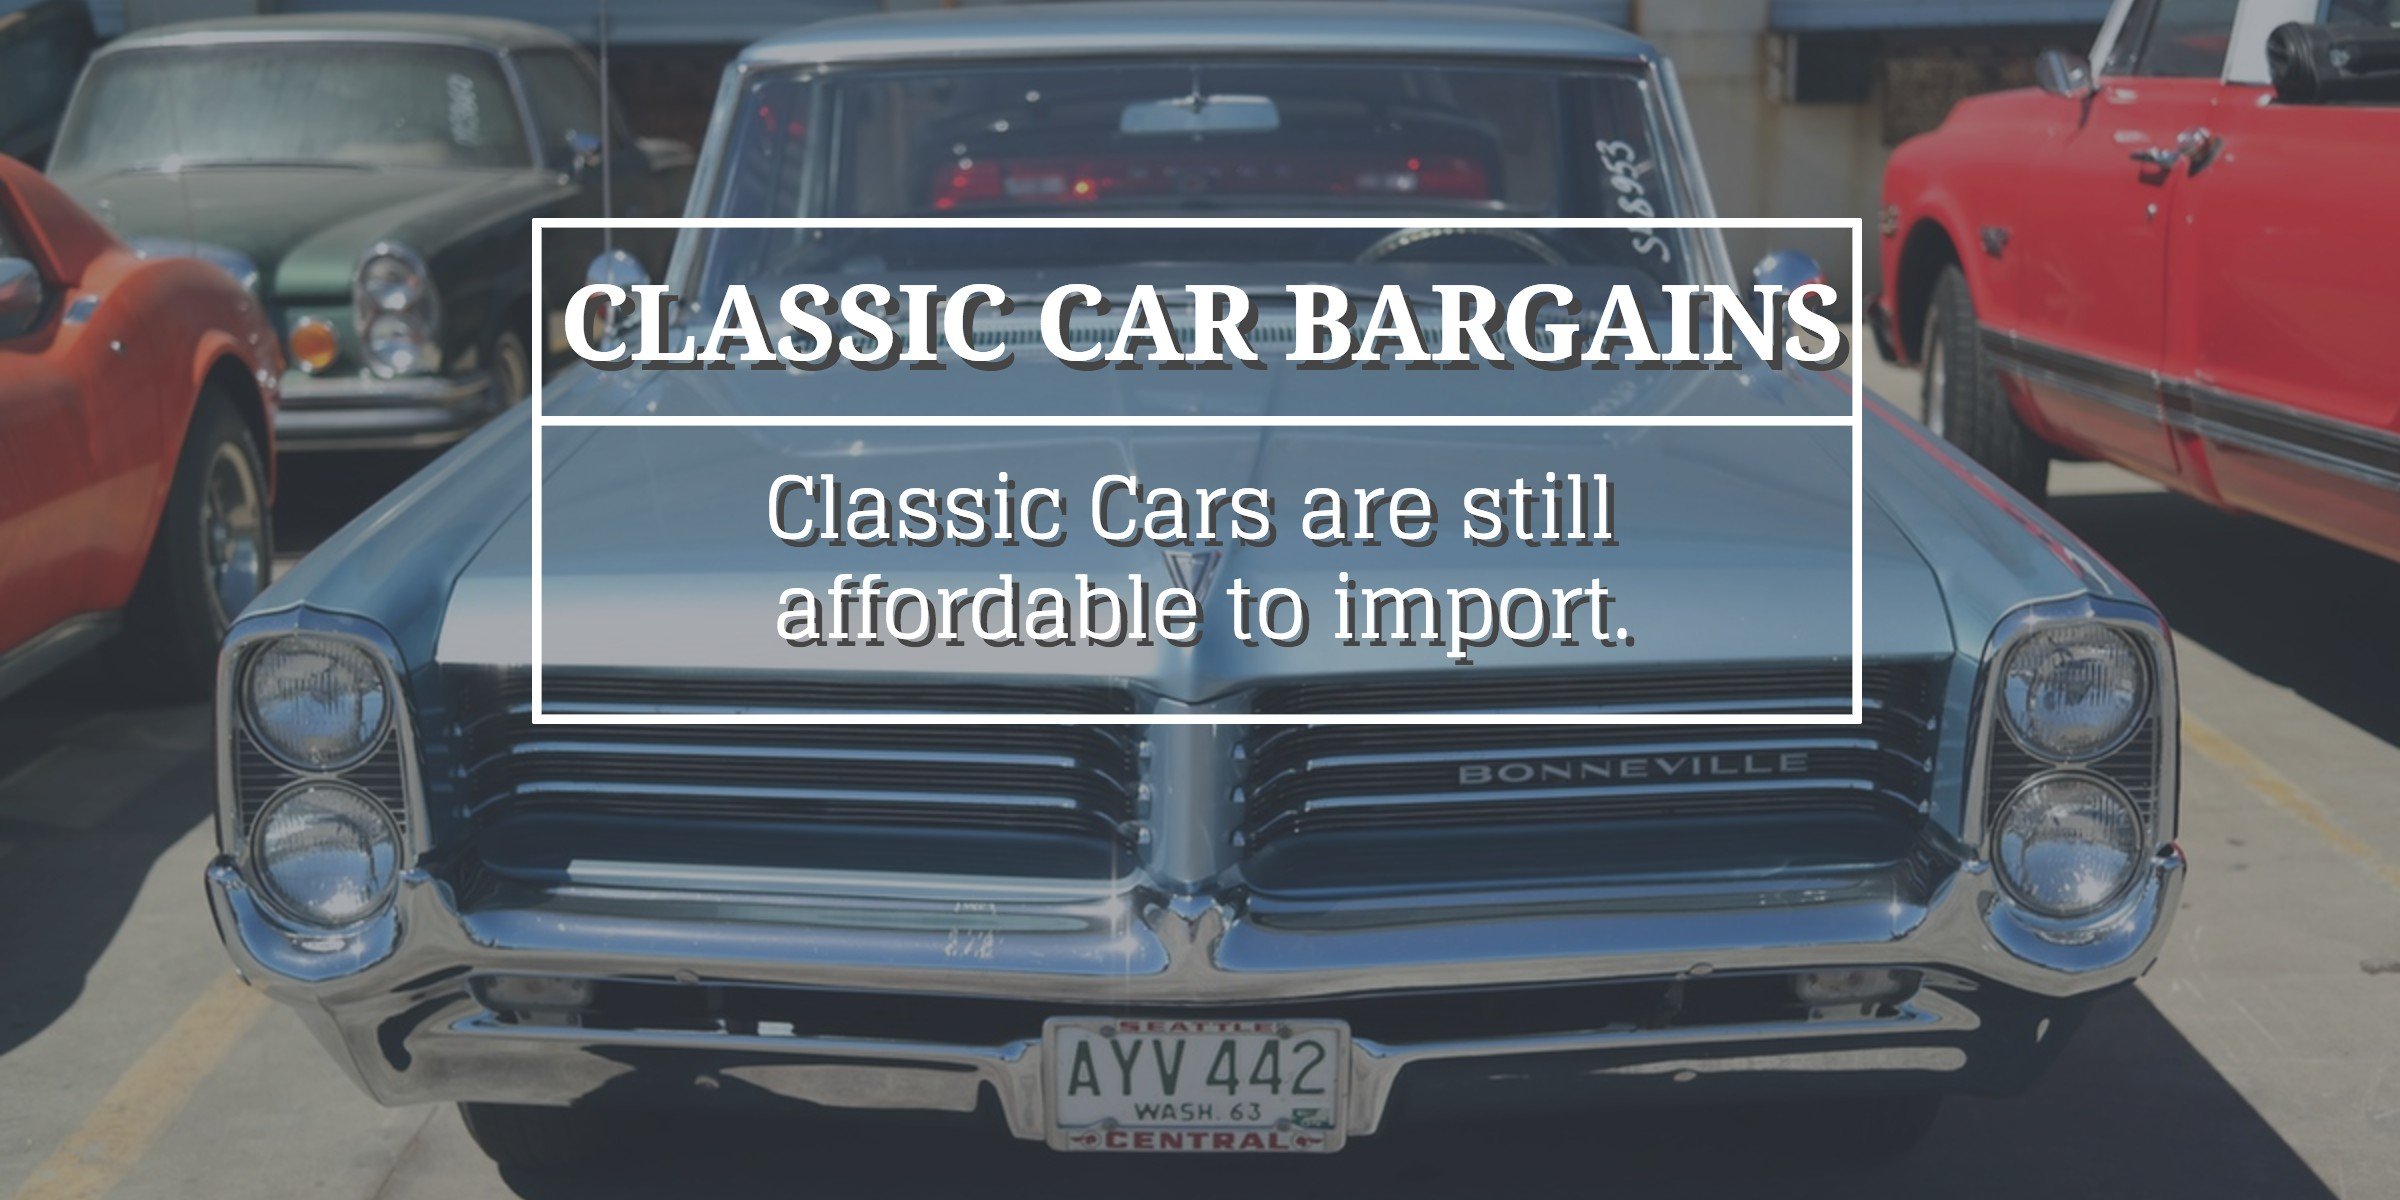 Bargain classic cars from the USA still exist